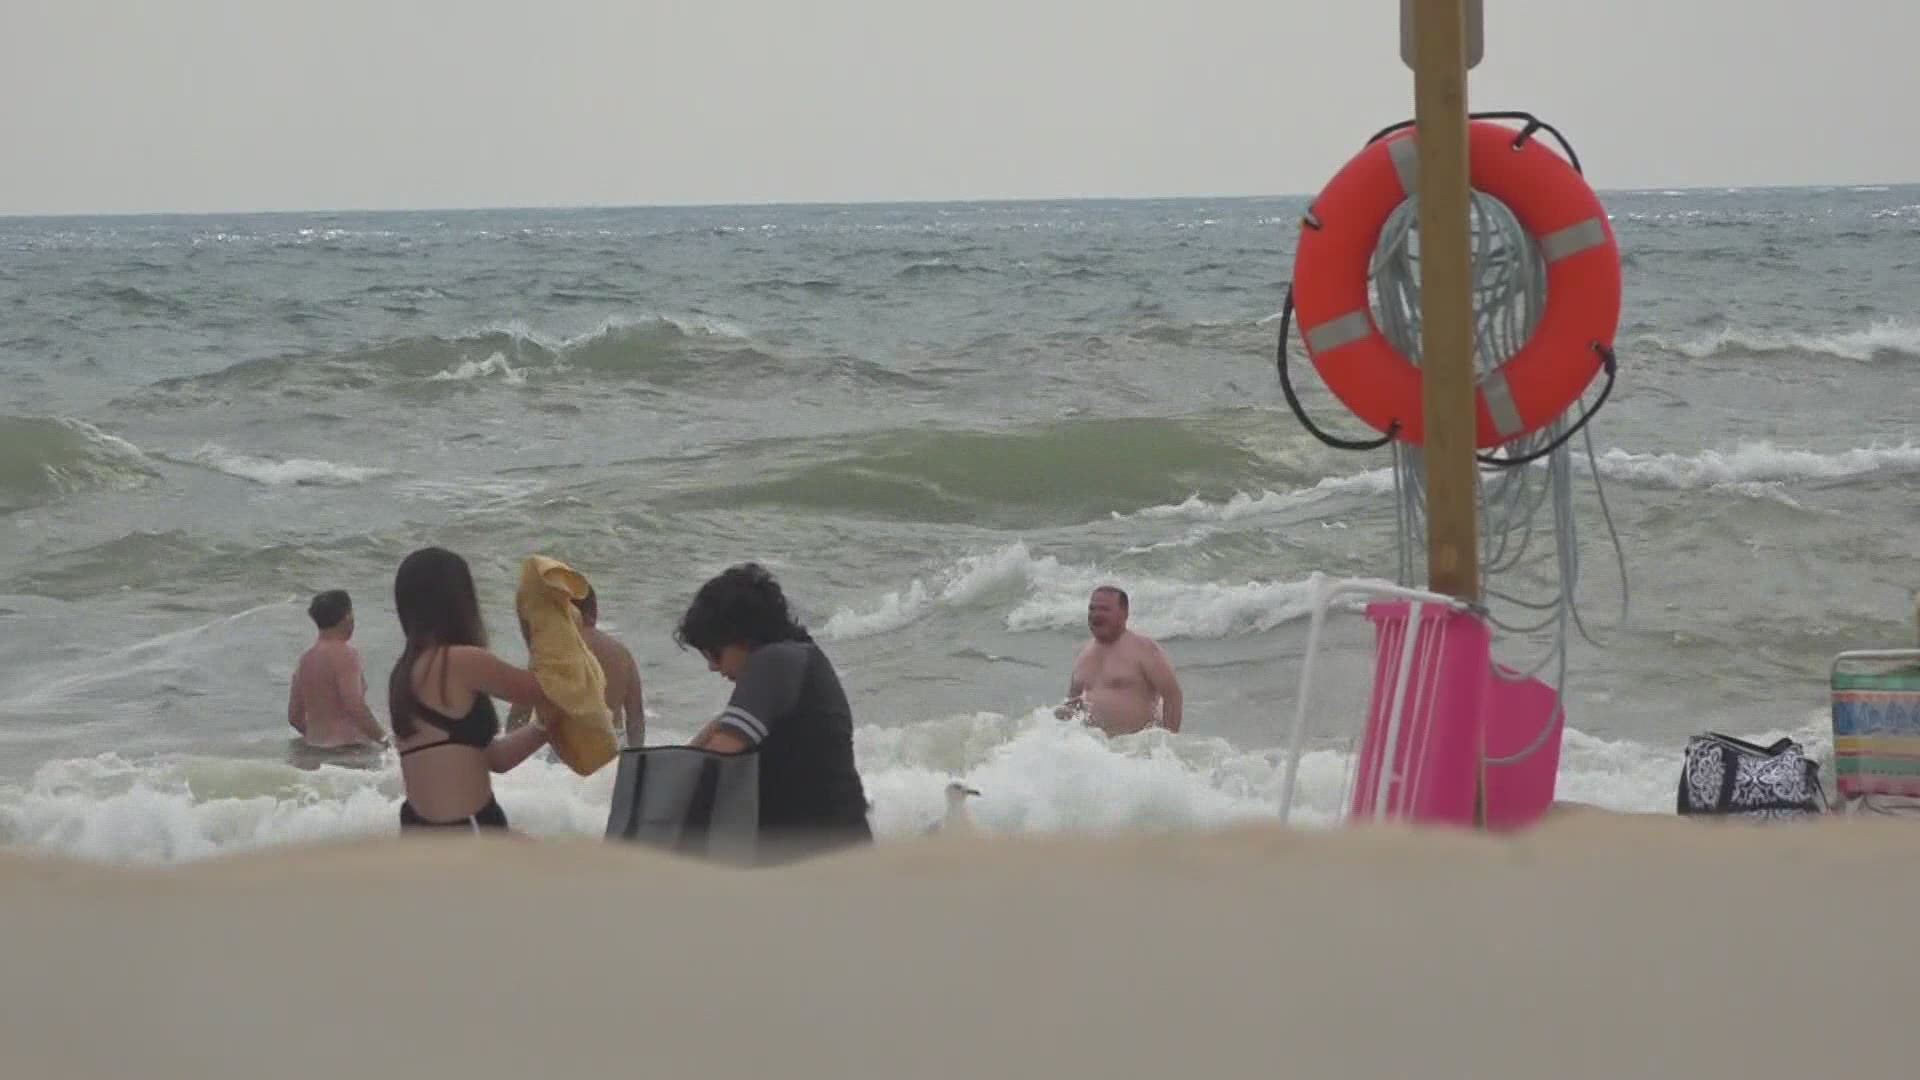 Emergency crews want visitors to know Lake Michigan's power, danger of rip currents.